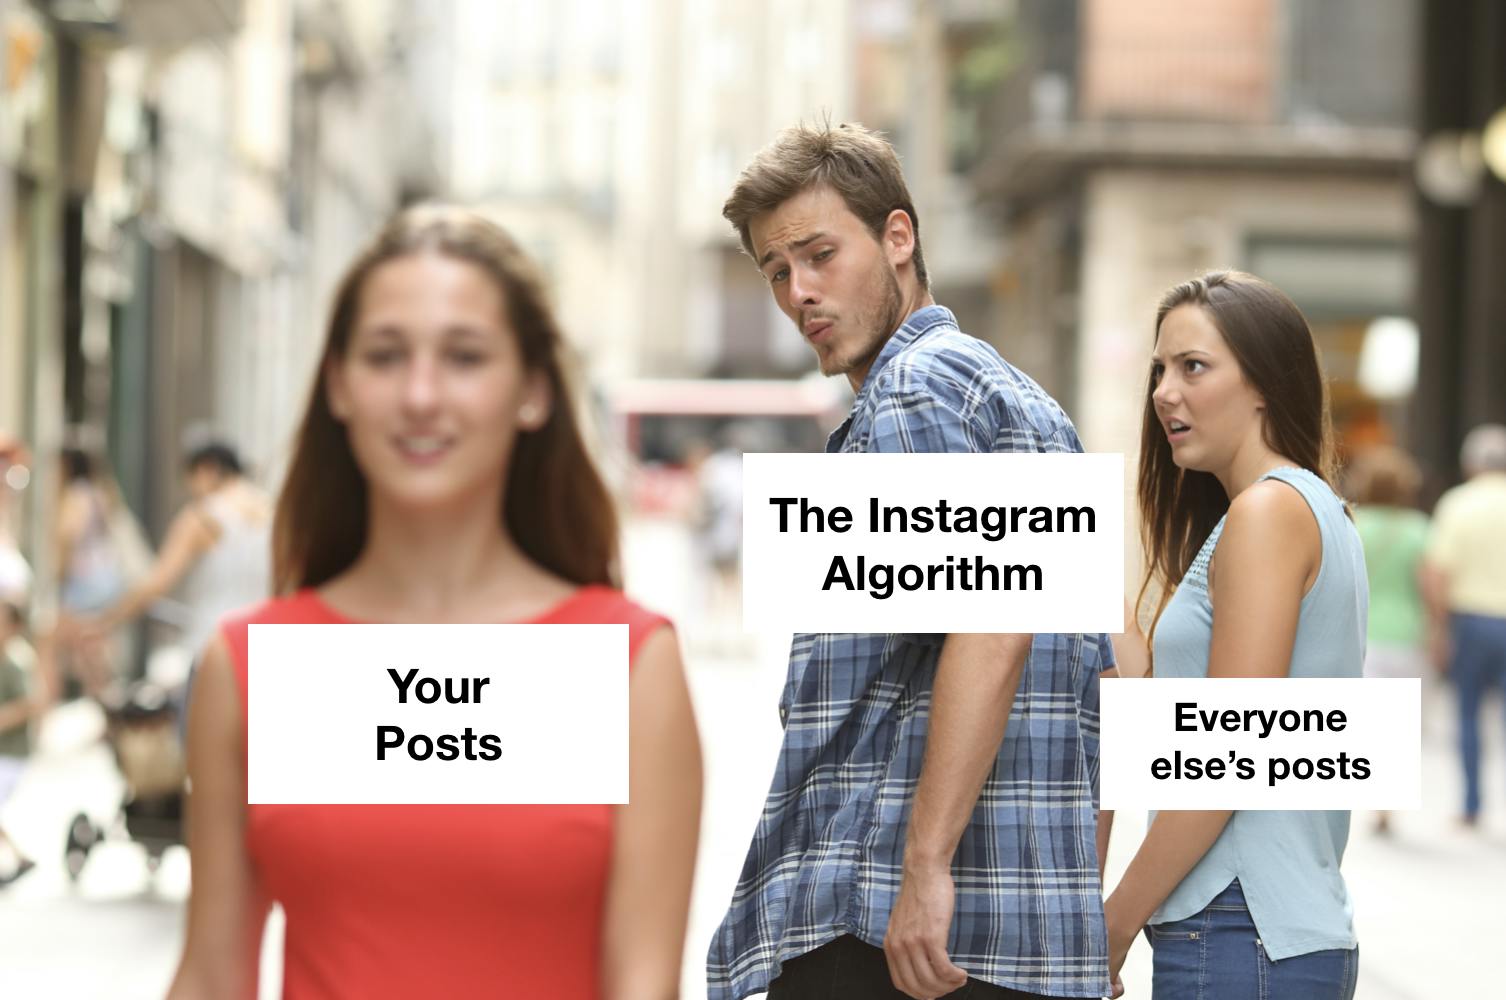 /the-principles-behind-how-the-instagram-algorithm-works-bec902eca17e feature image